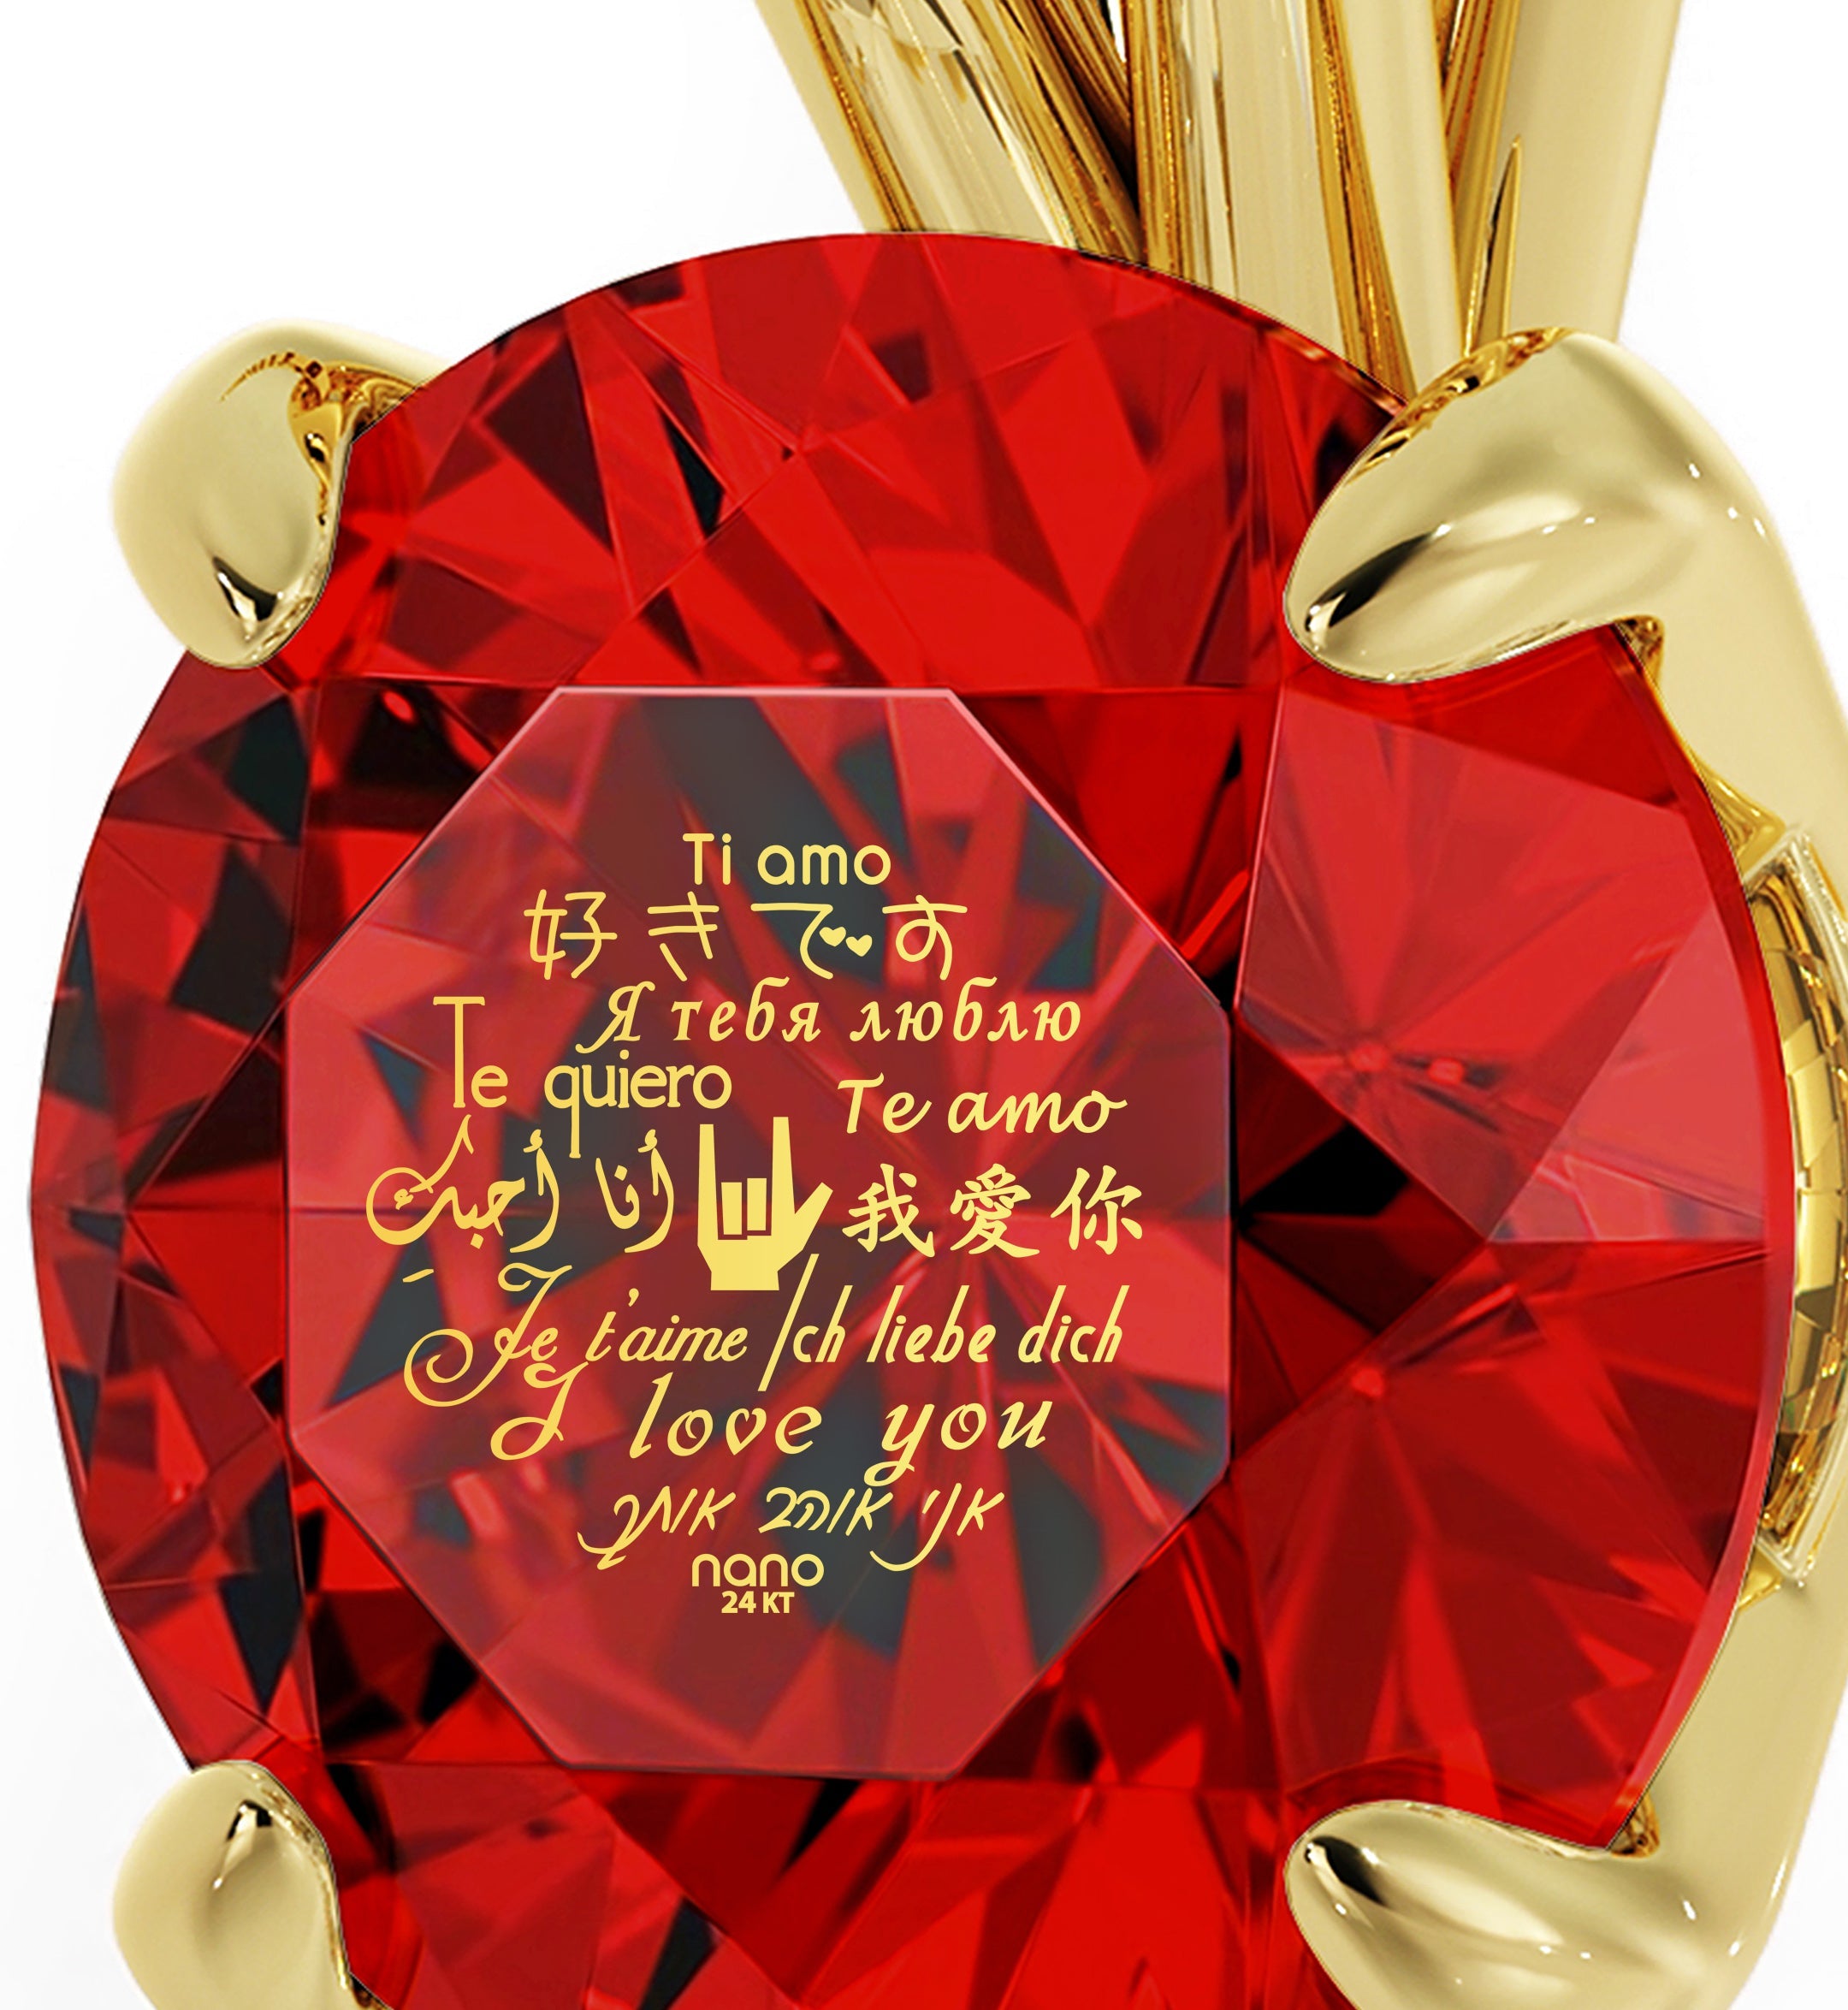 A close-up of a large Swarovski crystal held by a gold prong setting, with Gold Plated Silver I Love You Necklace Solitaire Pendant 12 Languages 24k Gold Inscribed written in multiple languages overlaying the gem.